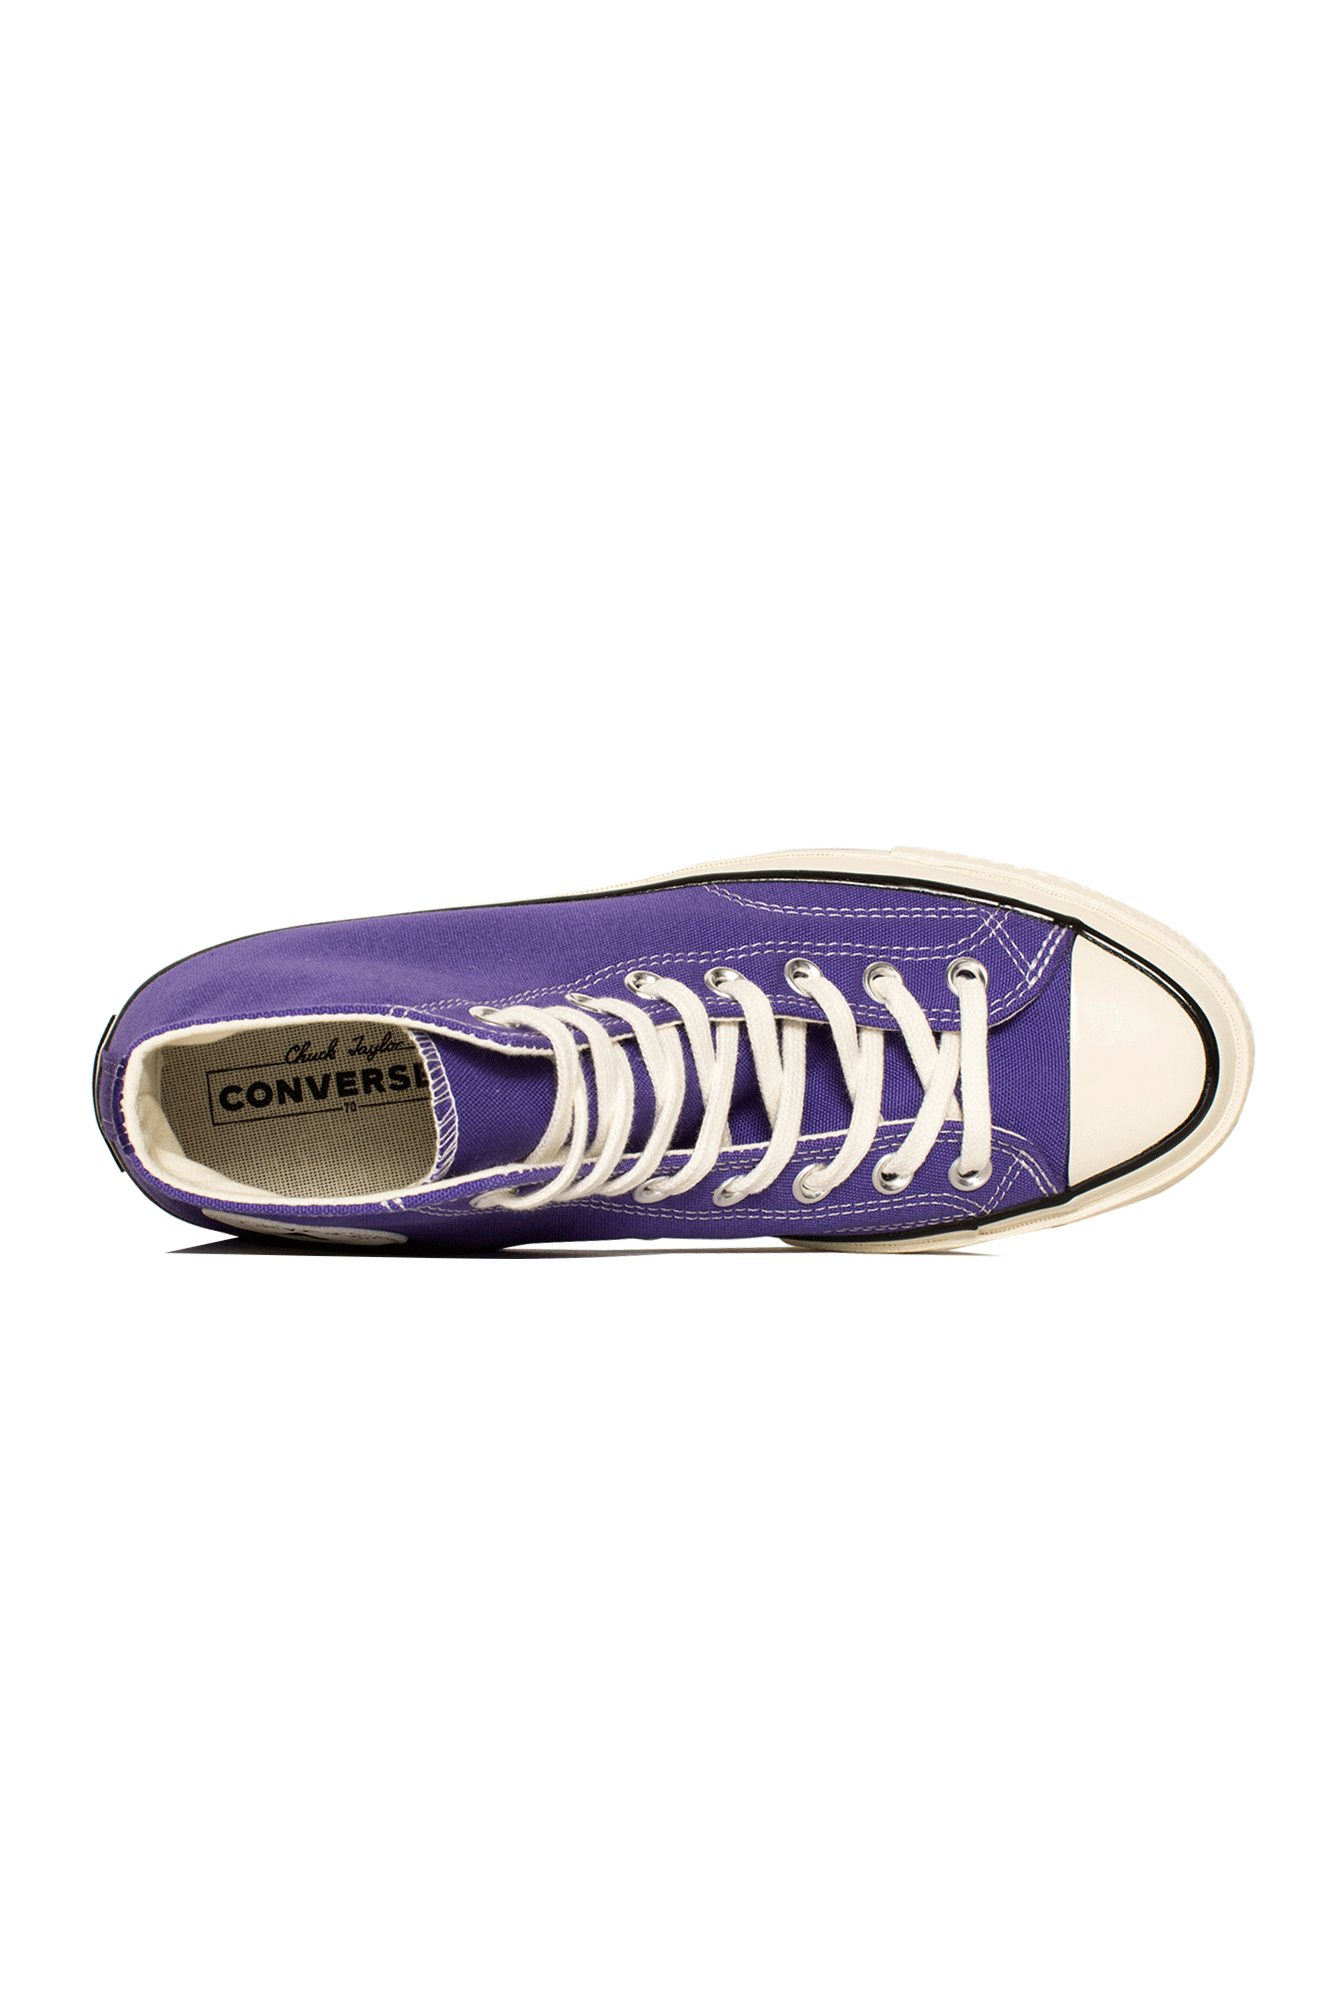 converse sneakers png